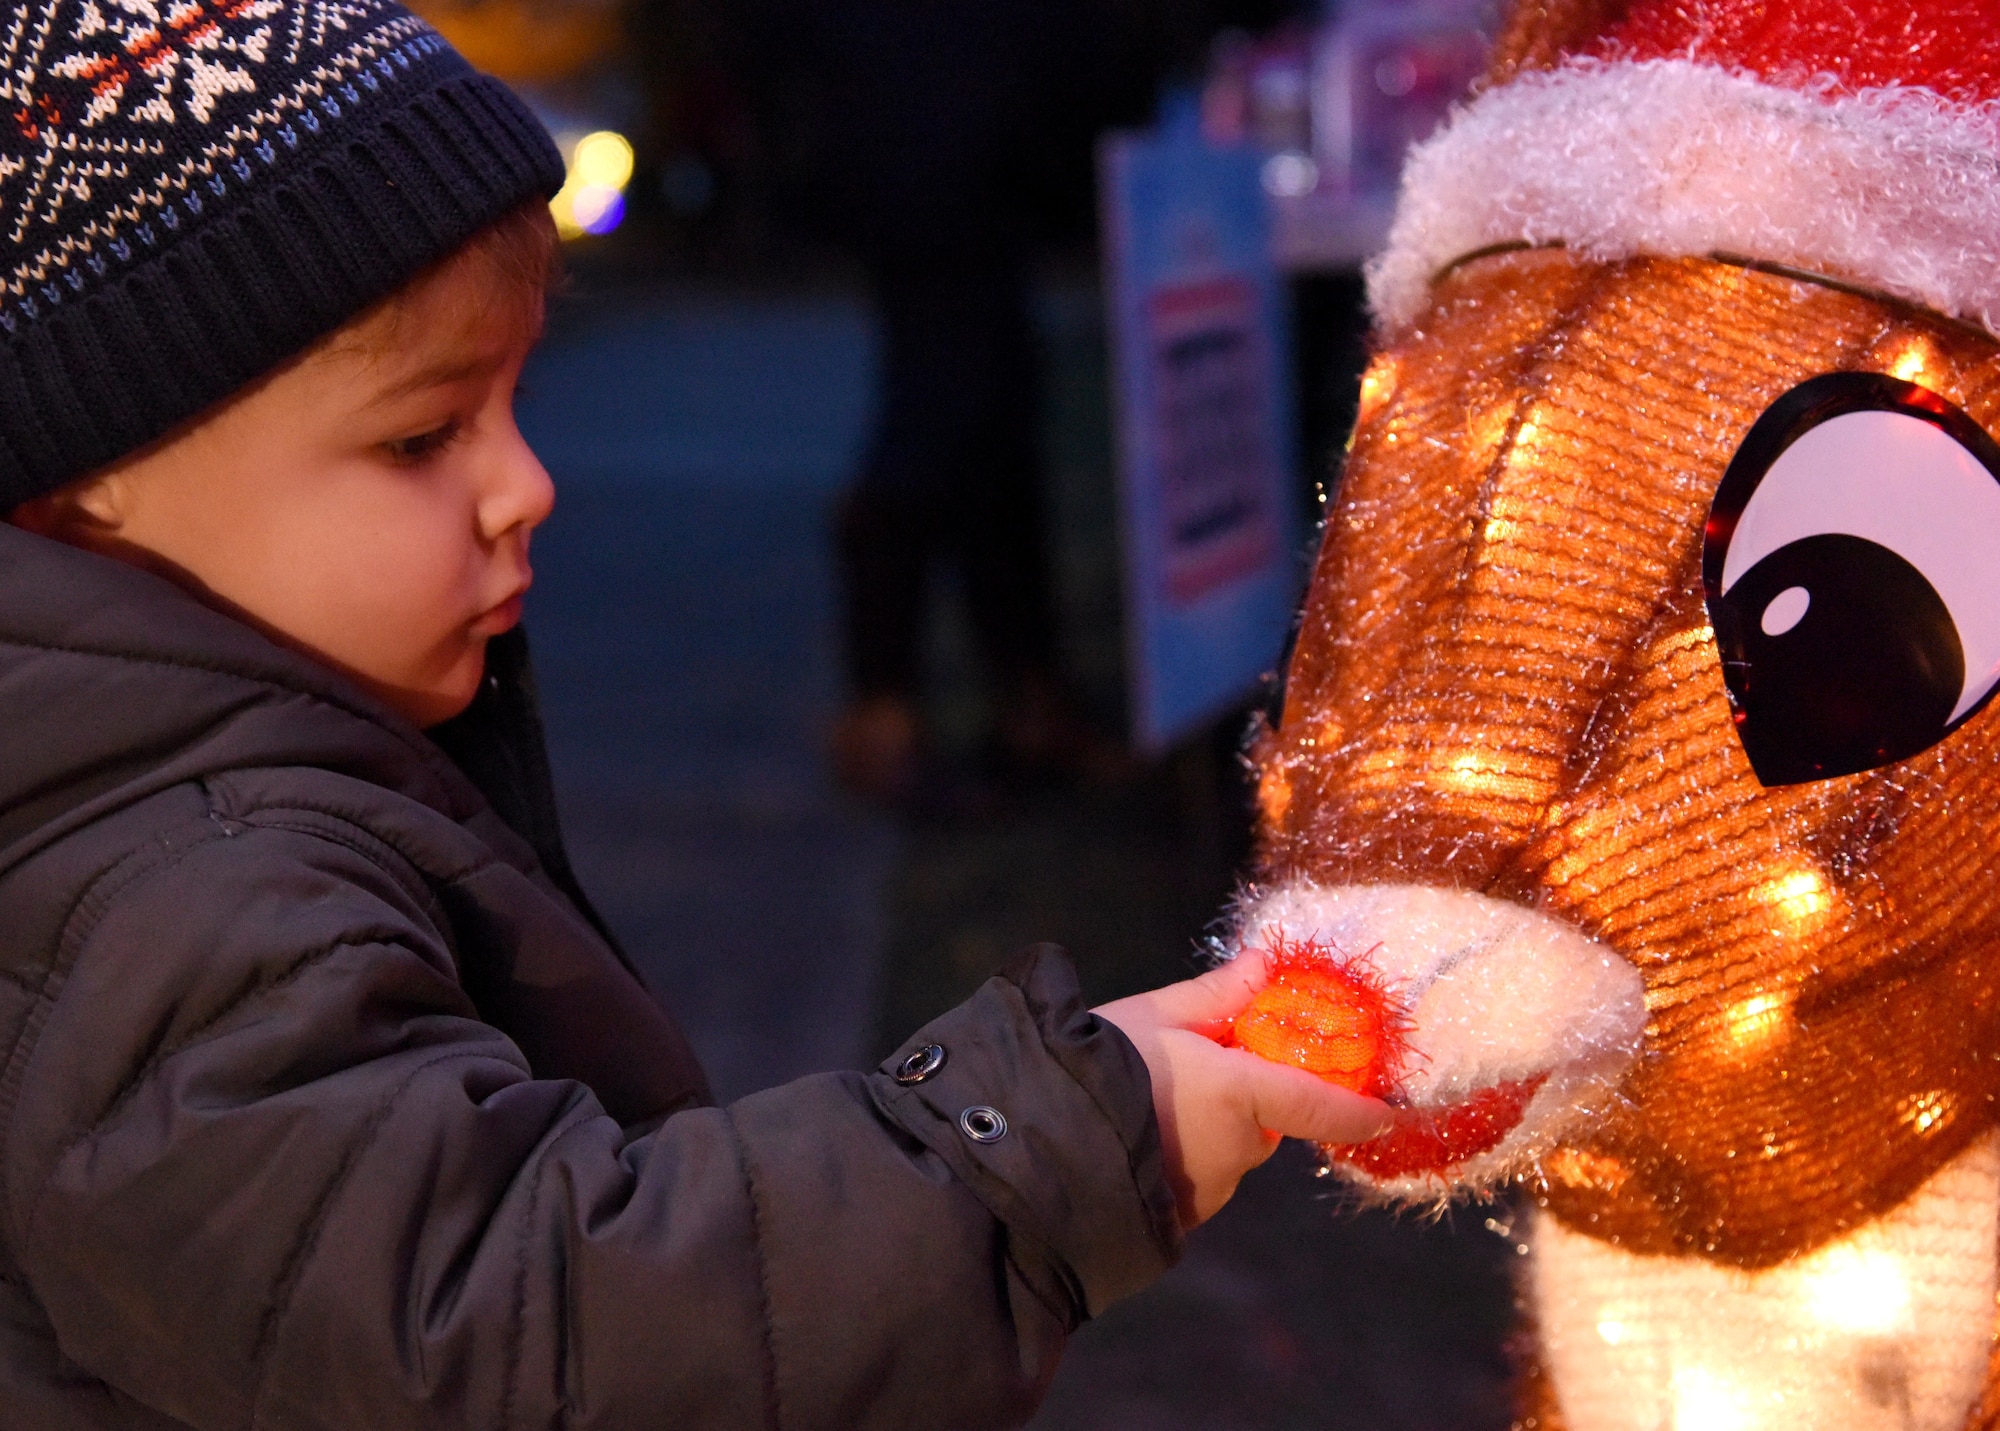 Grayson Ramirez, son of U.S. Navy Aerographers Mate 2nd Class Kadia Lazenby, Center For Naval Aviation Technical Training Unit Keesler, inspects Rudolph's nose during Christmas in the Park at Keesler Air Force Base, Mississippi, Dec. 6, 2018. The event hosted by Outdoor Recreation included cookie and ornament decorating, games and visits with Santa. (U.S. Air Force photo by Kemberly Groue)